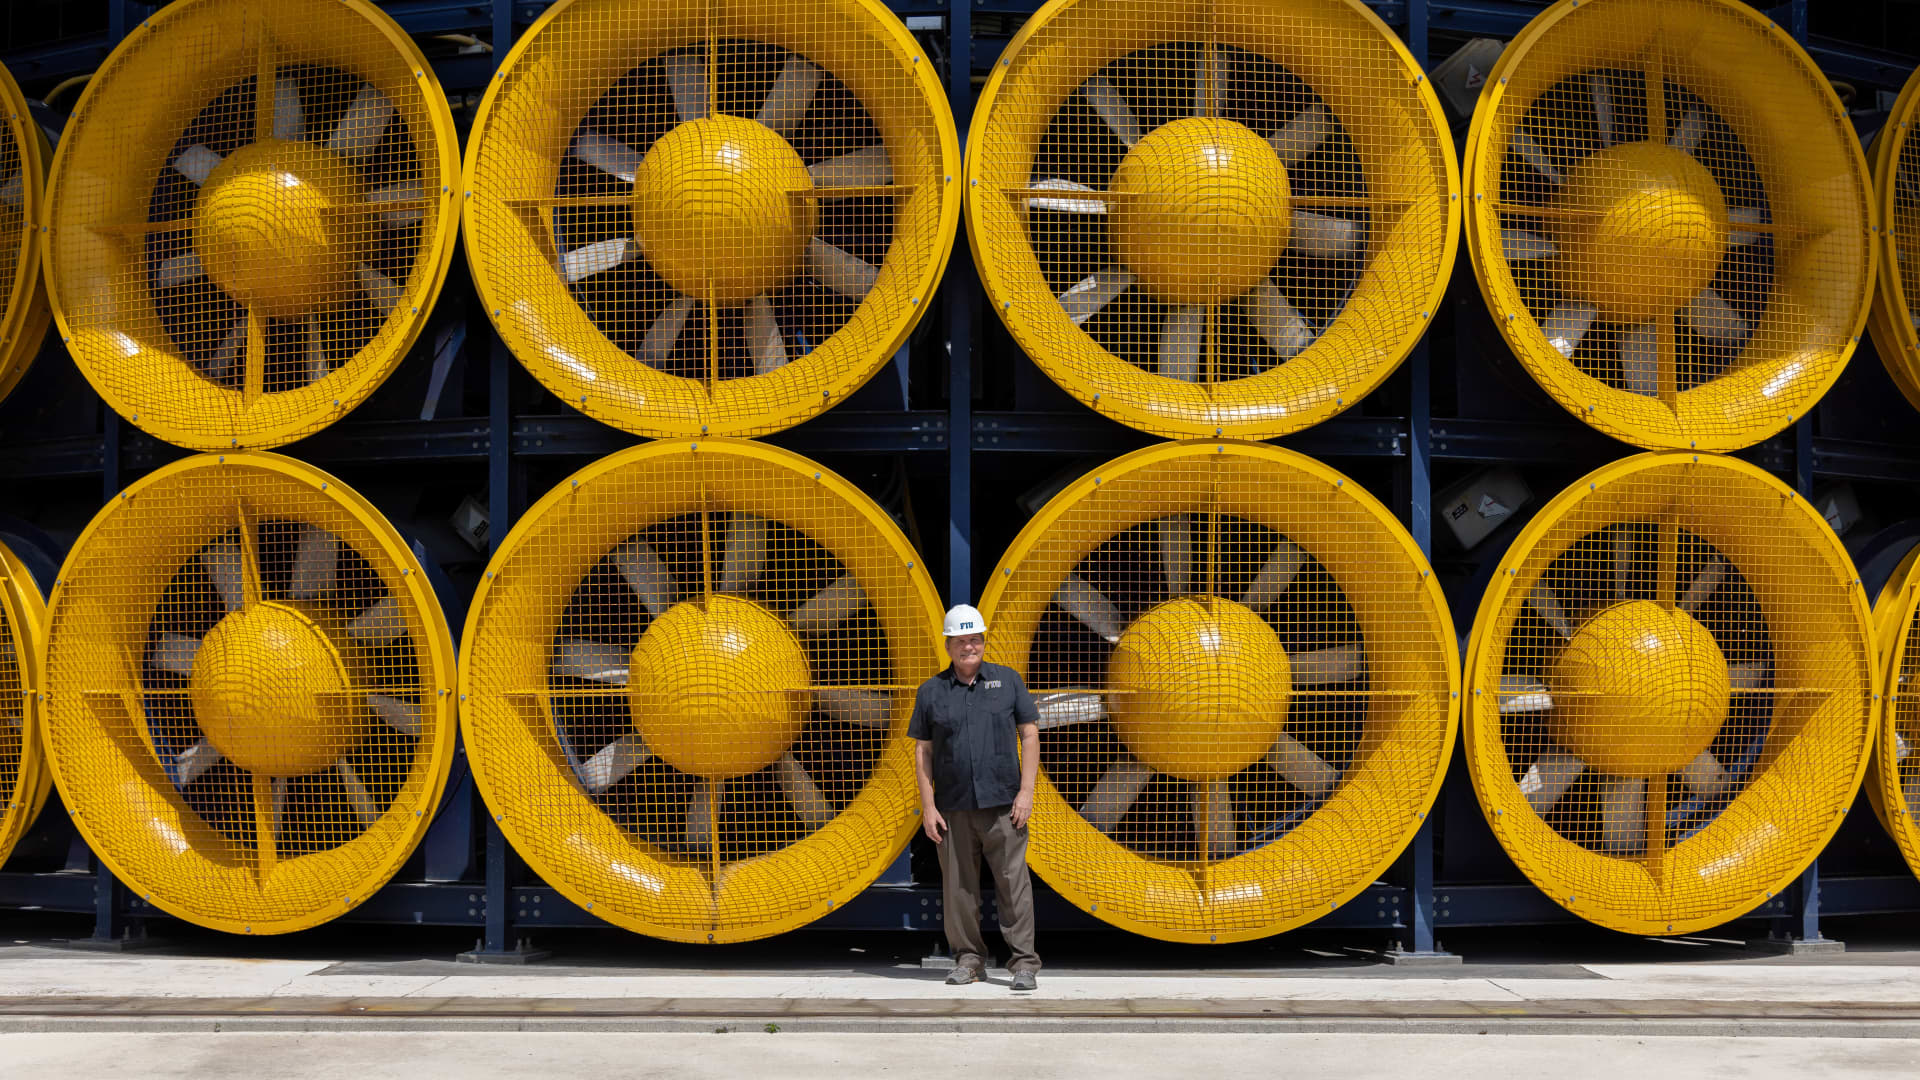 Erik Salna at the Wall of Wind facility, which simulates conditions of a Category 5 hurricane.